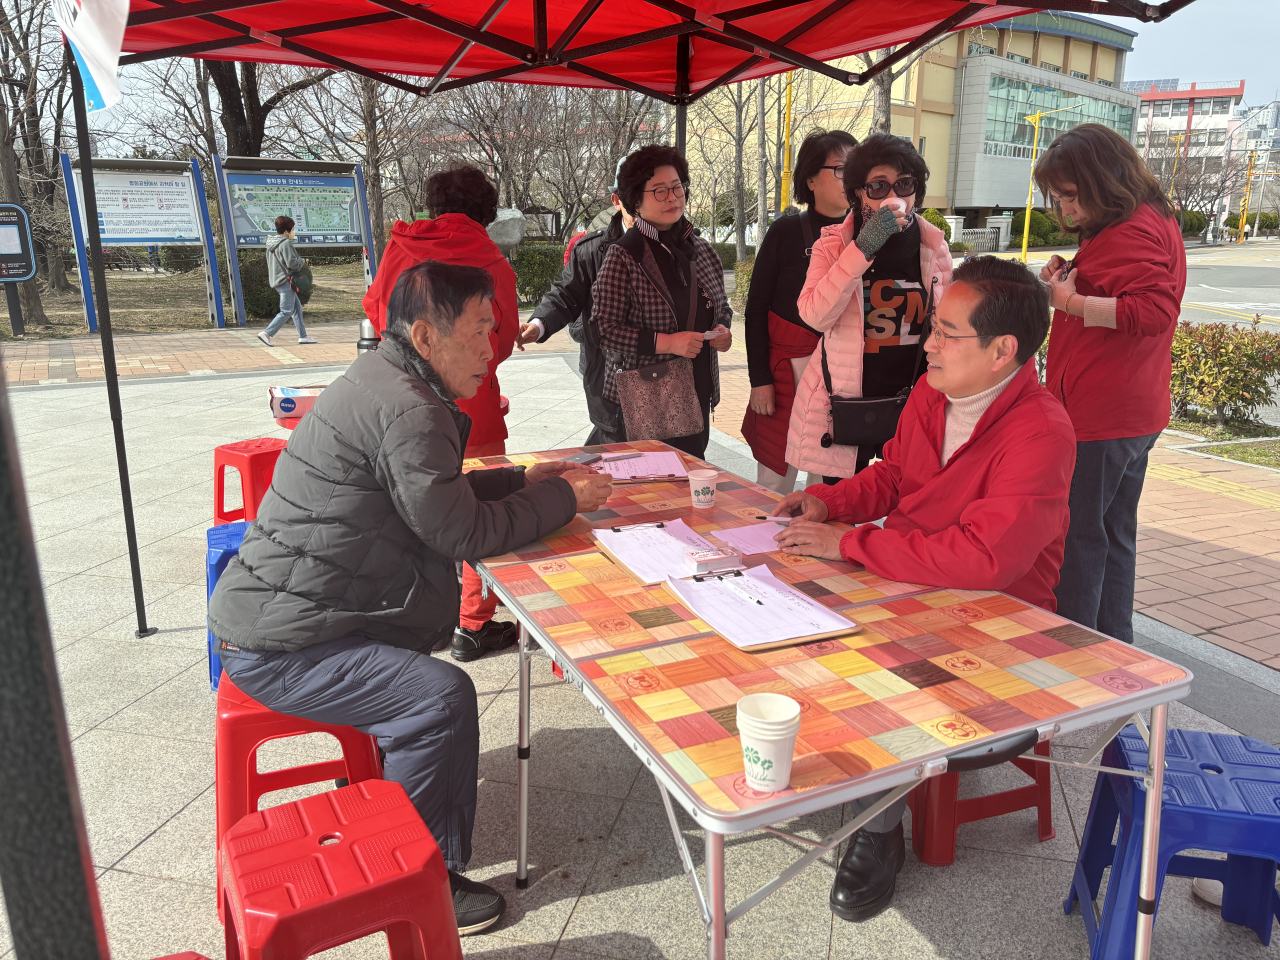 People Power Party Rep. Park Soo-young, sitting at the table in the red that represents his party, says he is setting up booths around the neighborhood every weekend to meet and hear out local residents in person. (Kim Arin/The Korea Herald)